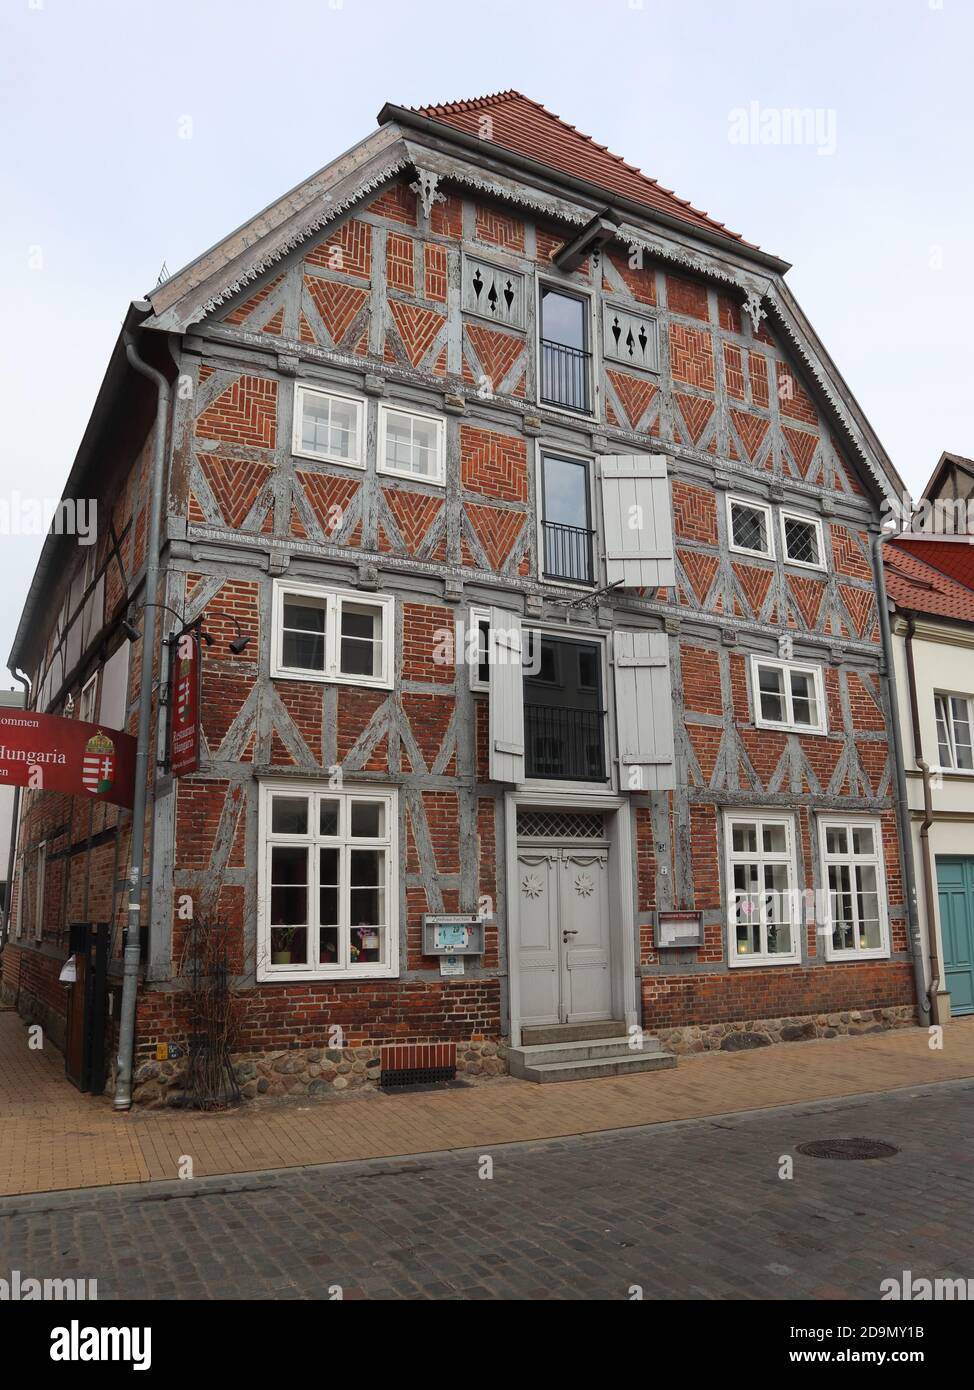 Parchim, Mecklenburg-Vorpommern/ Germany - August 18 2020: Traditional half timbered house with red bricks in the center of Parchim, Germany Stock Photo